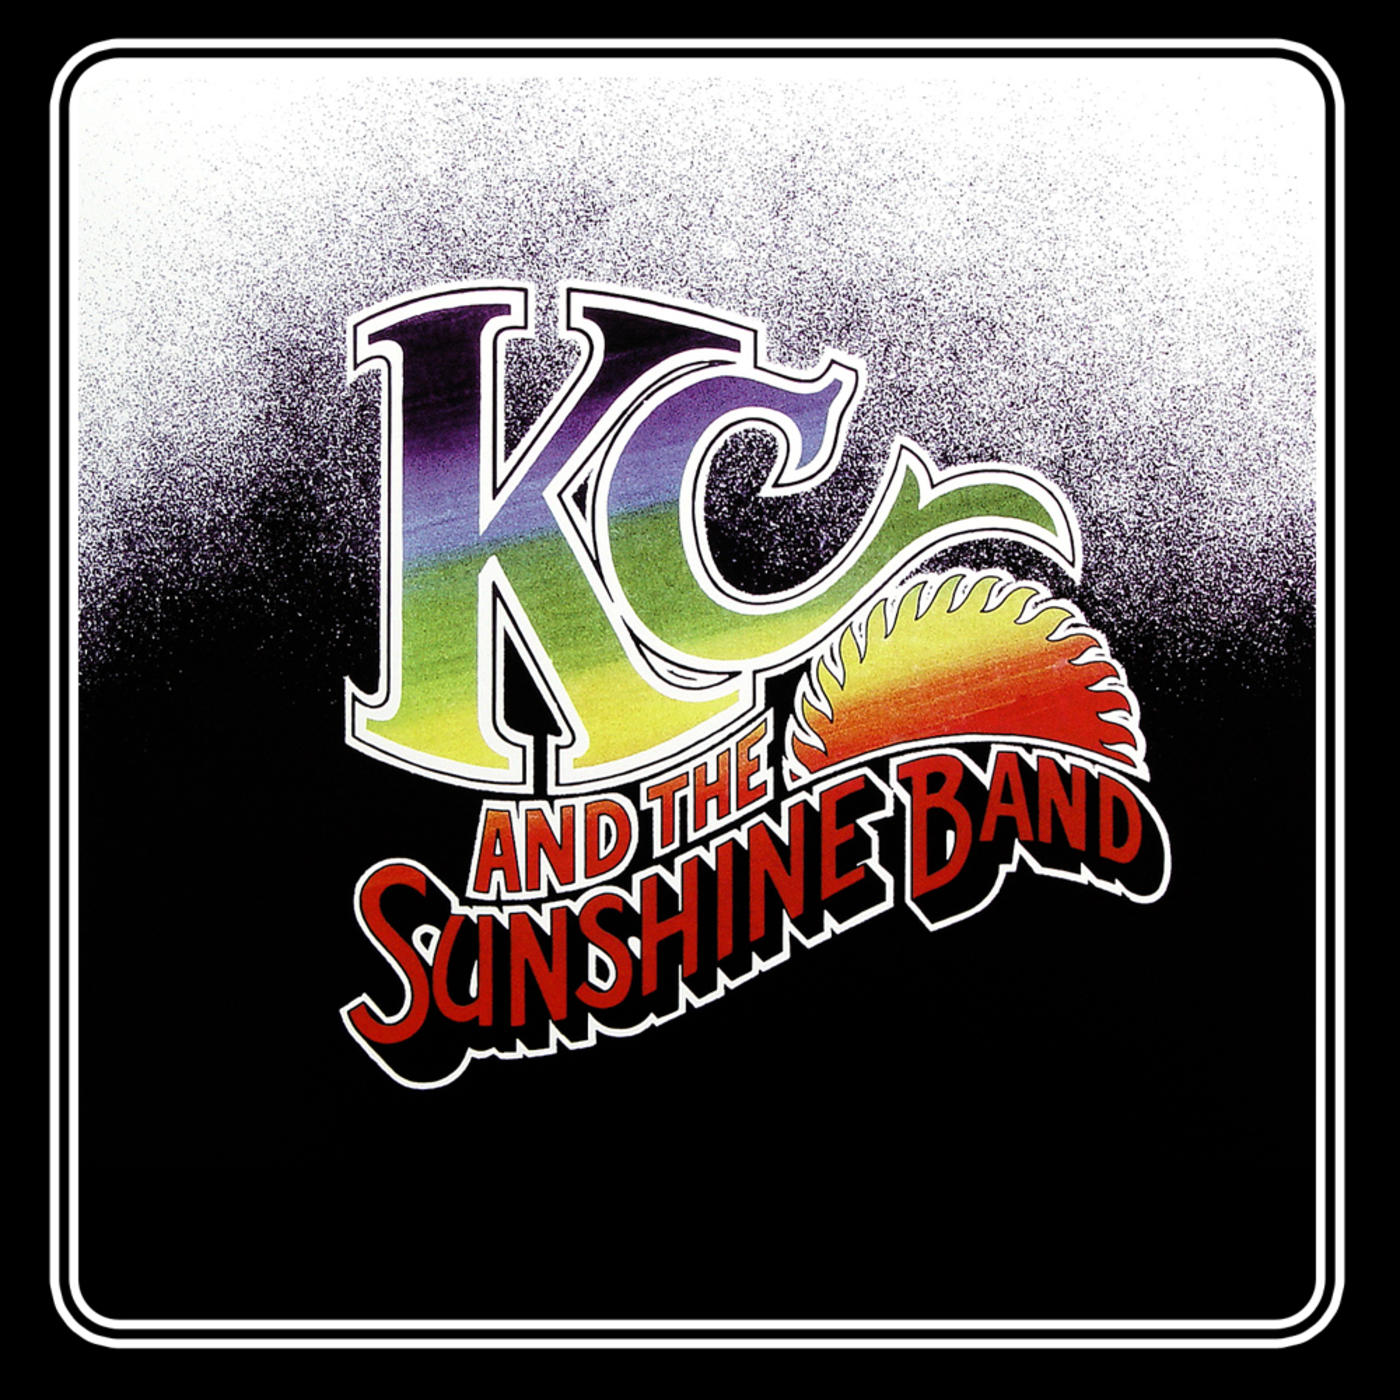 10 Awesome Kc And The Sunshine Band Album Covers - richtercollective.com